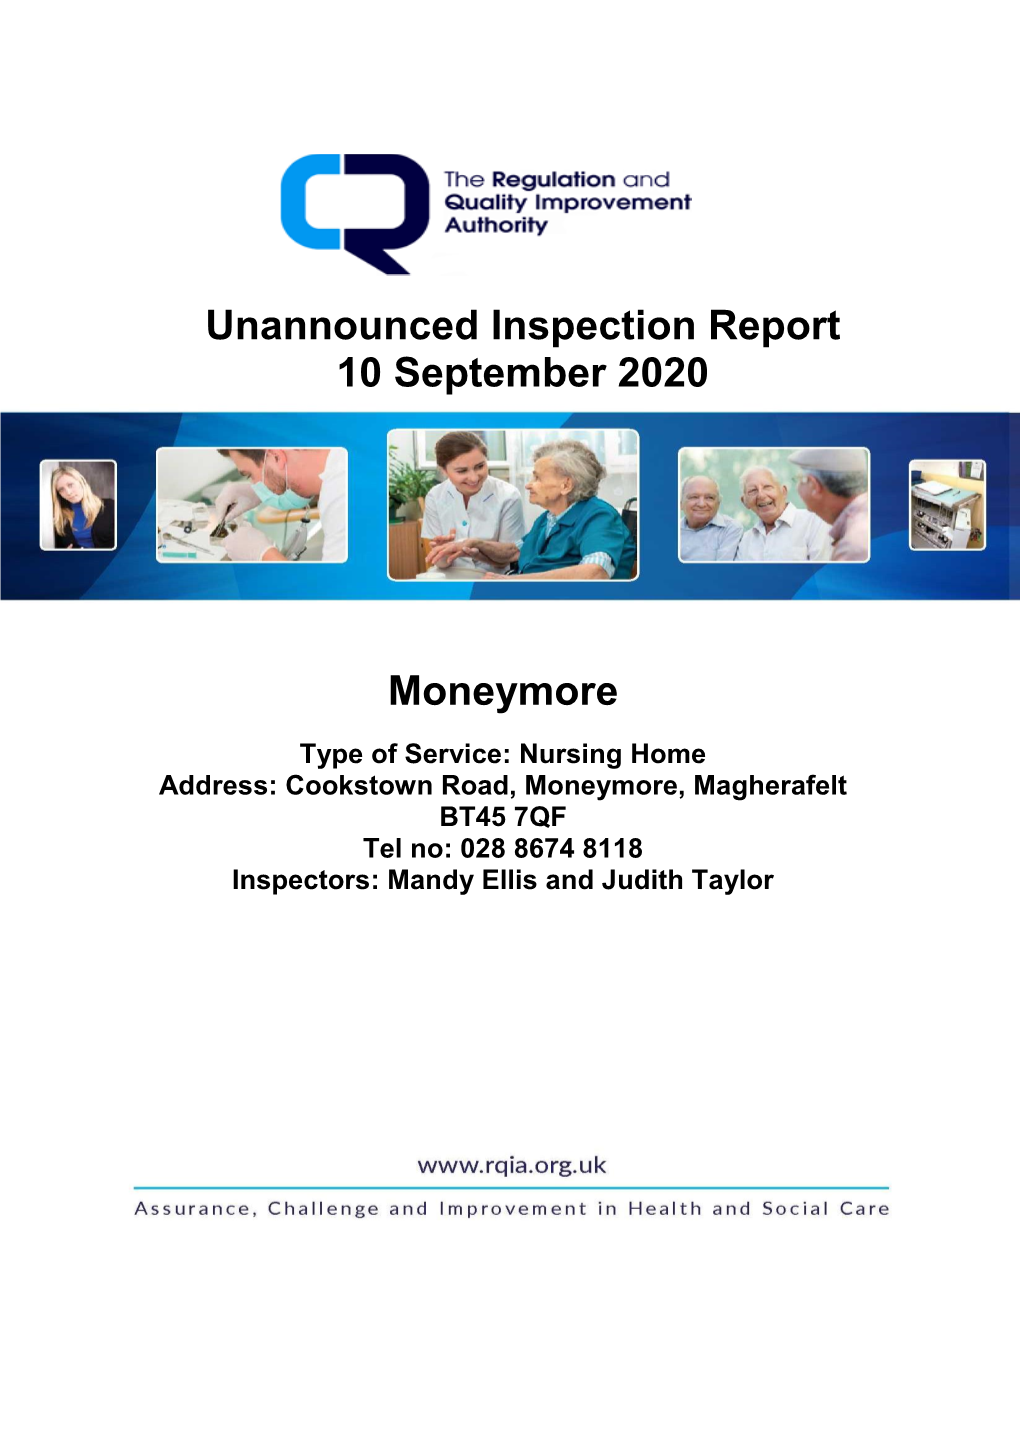 Unannounced Inspection Report 10 September 2020 Moneymore